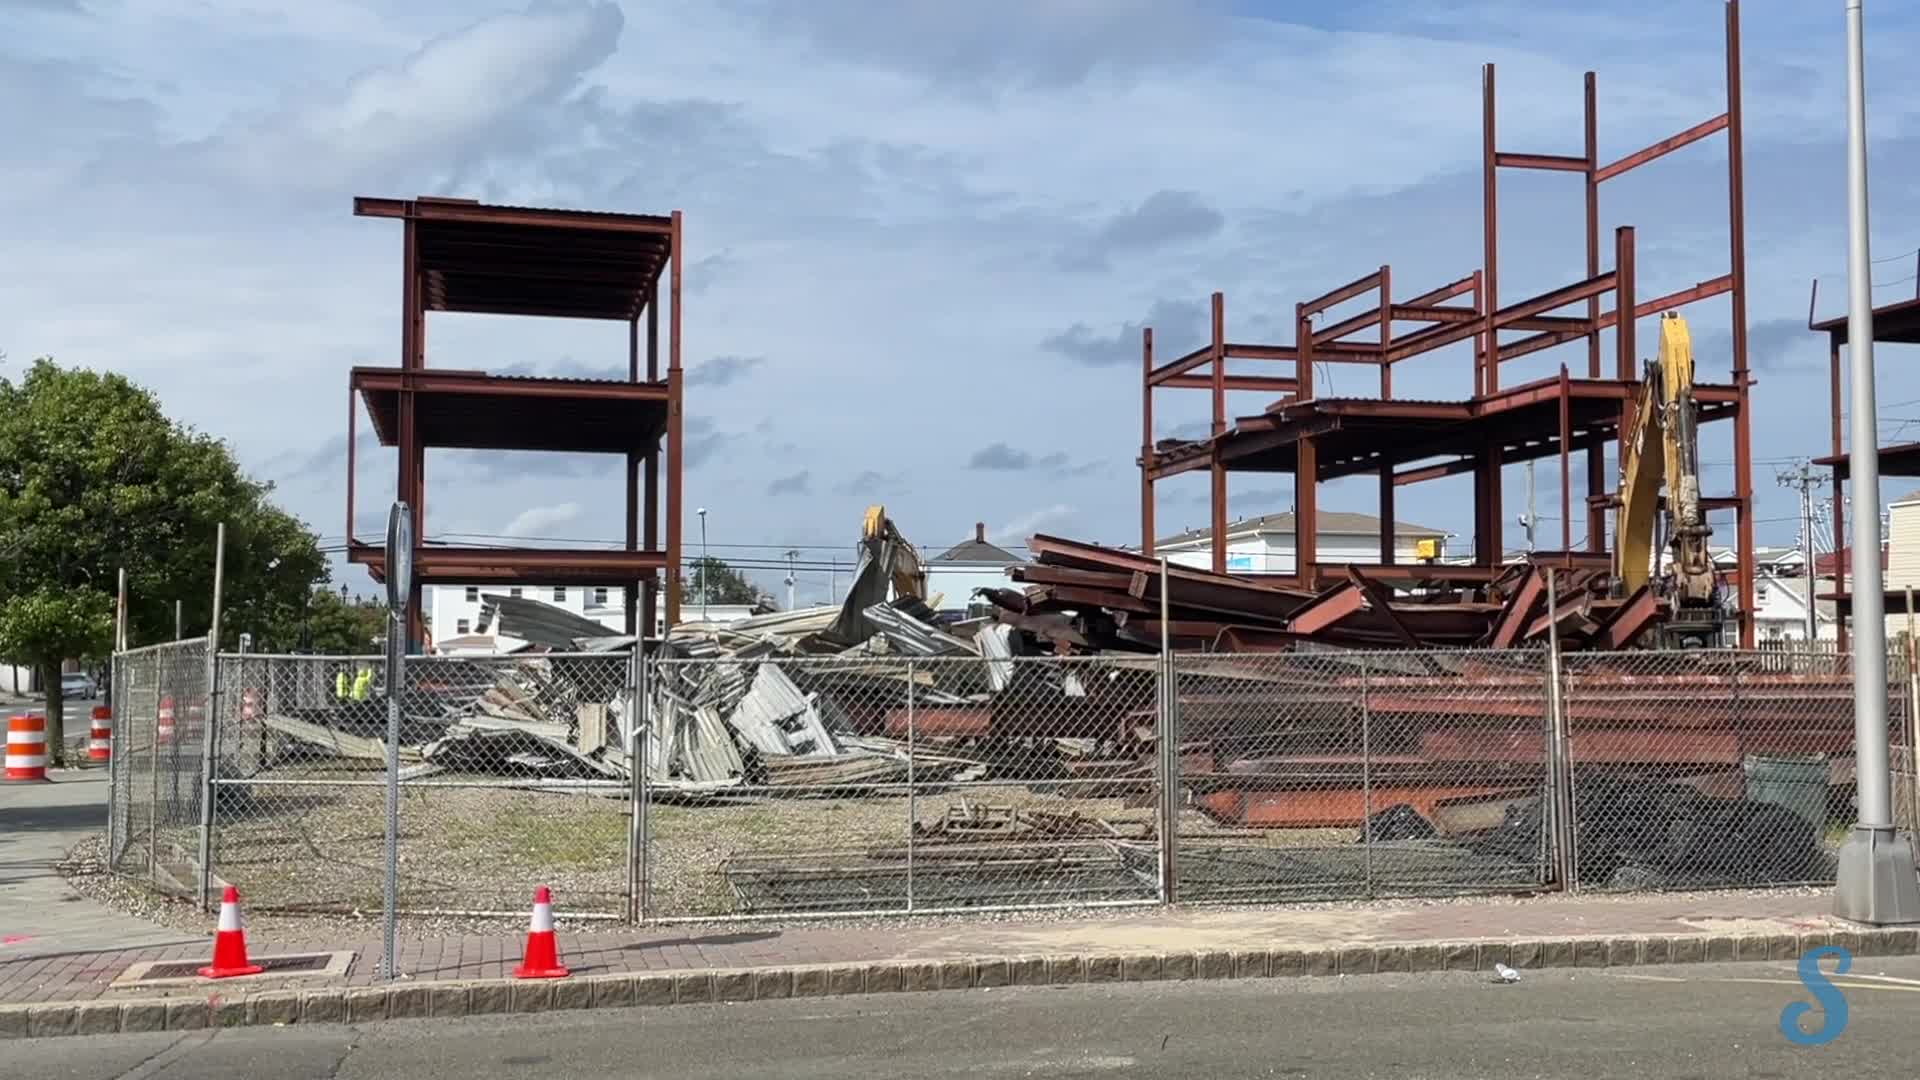 'Steel Structure' Demolished in Seaside Heights, Aug. 16, 2021